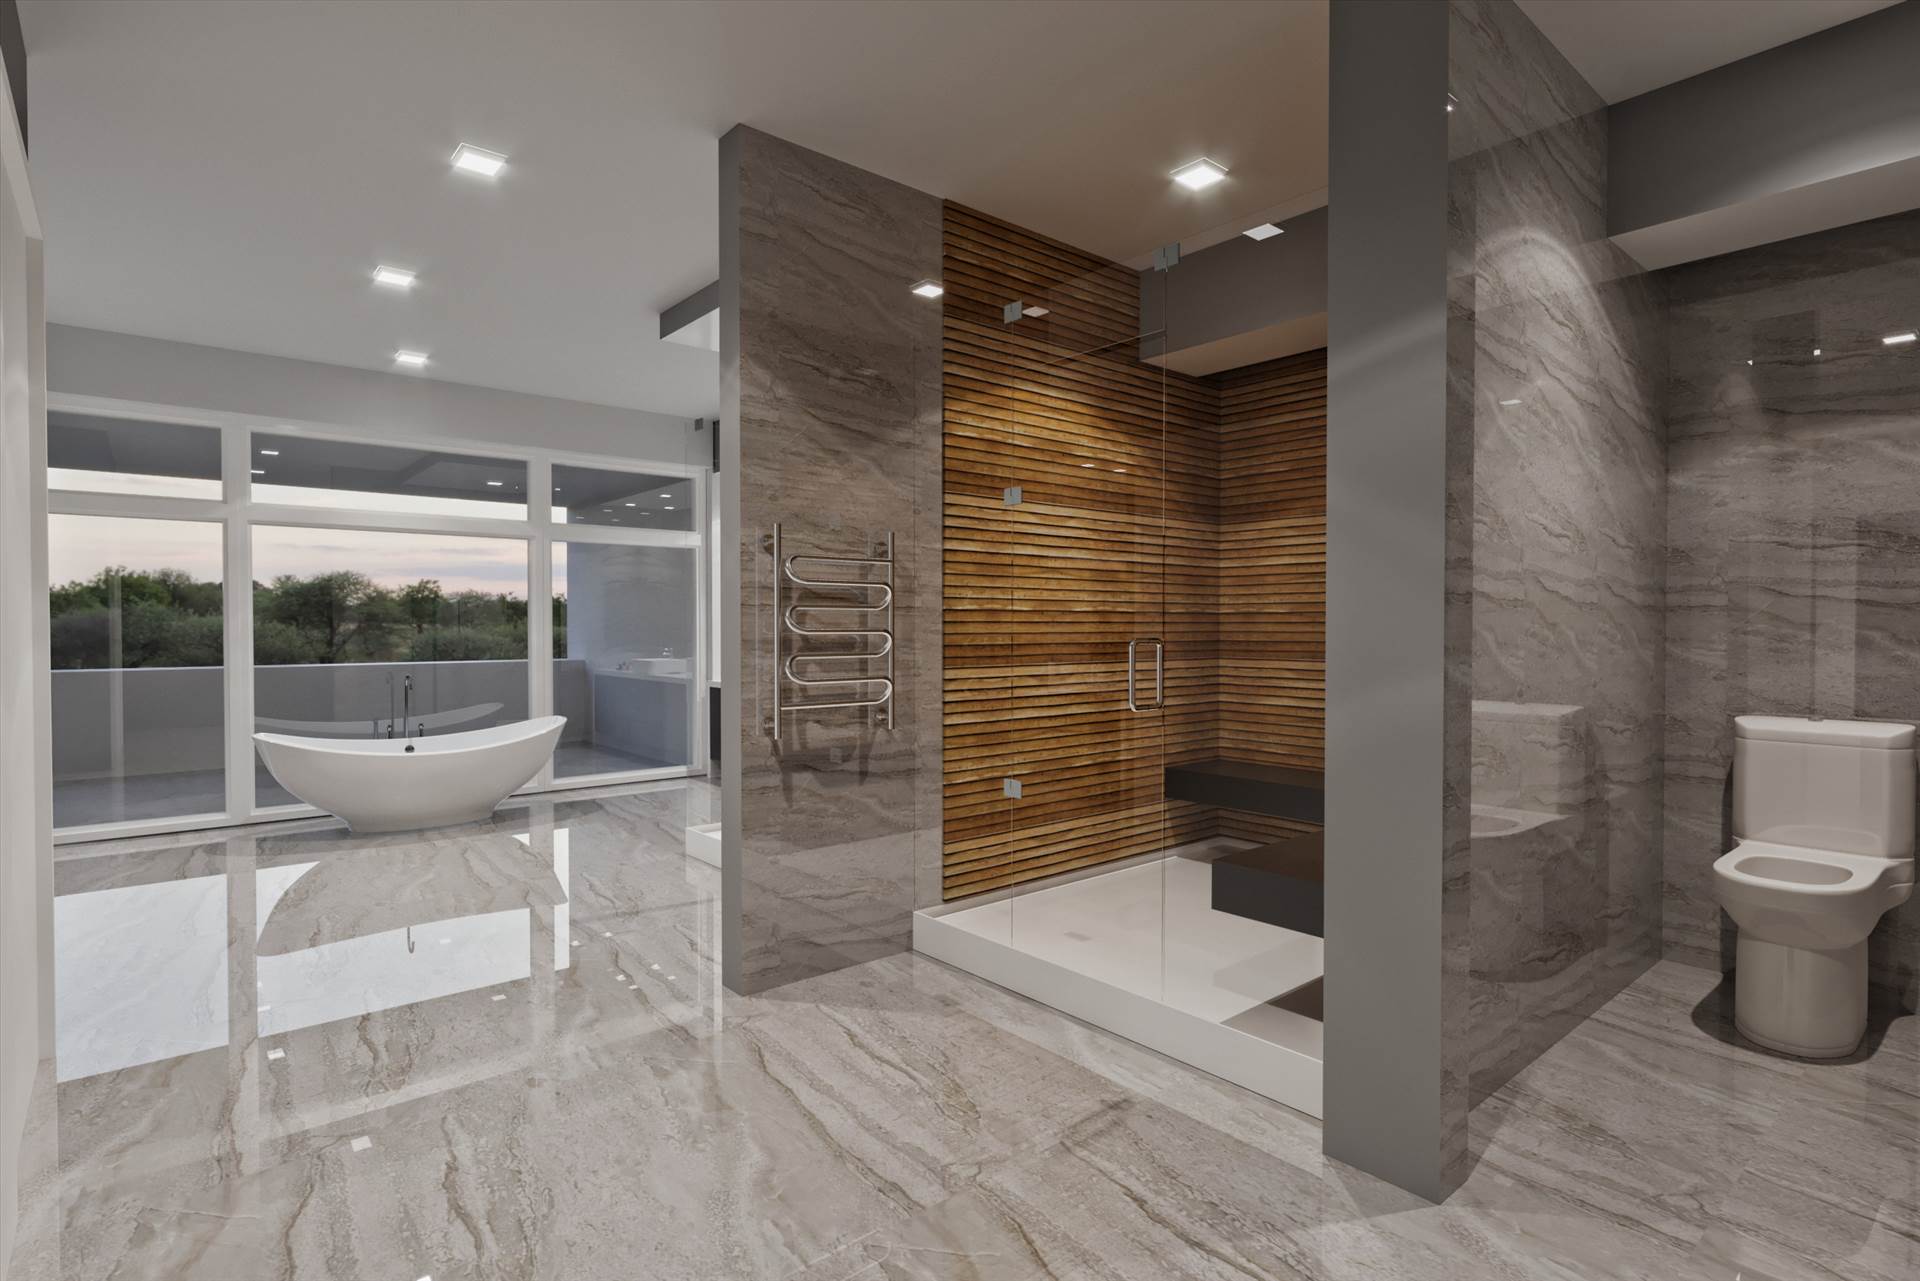 Bathroom Visualization Services Palm Beach Florida Bathroom Interior Design Visualization Palm Beach Florida. Our renderings go beyond photorealistic visualization solutions we’ve created for our real estate developers, interior designers and architects. by JMSDCONSULTANT